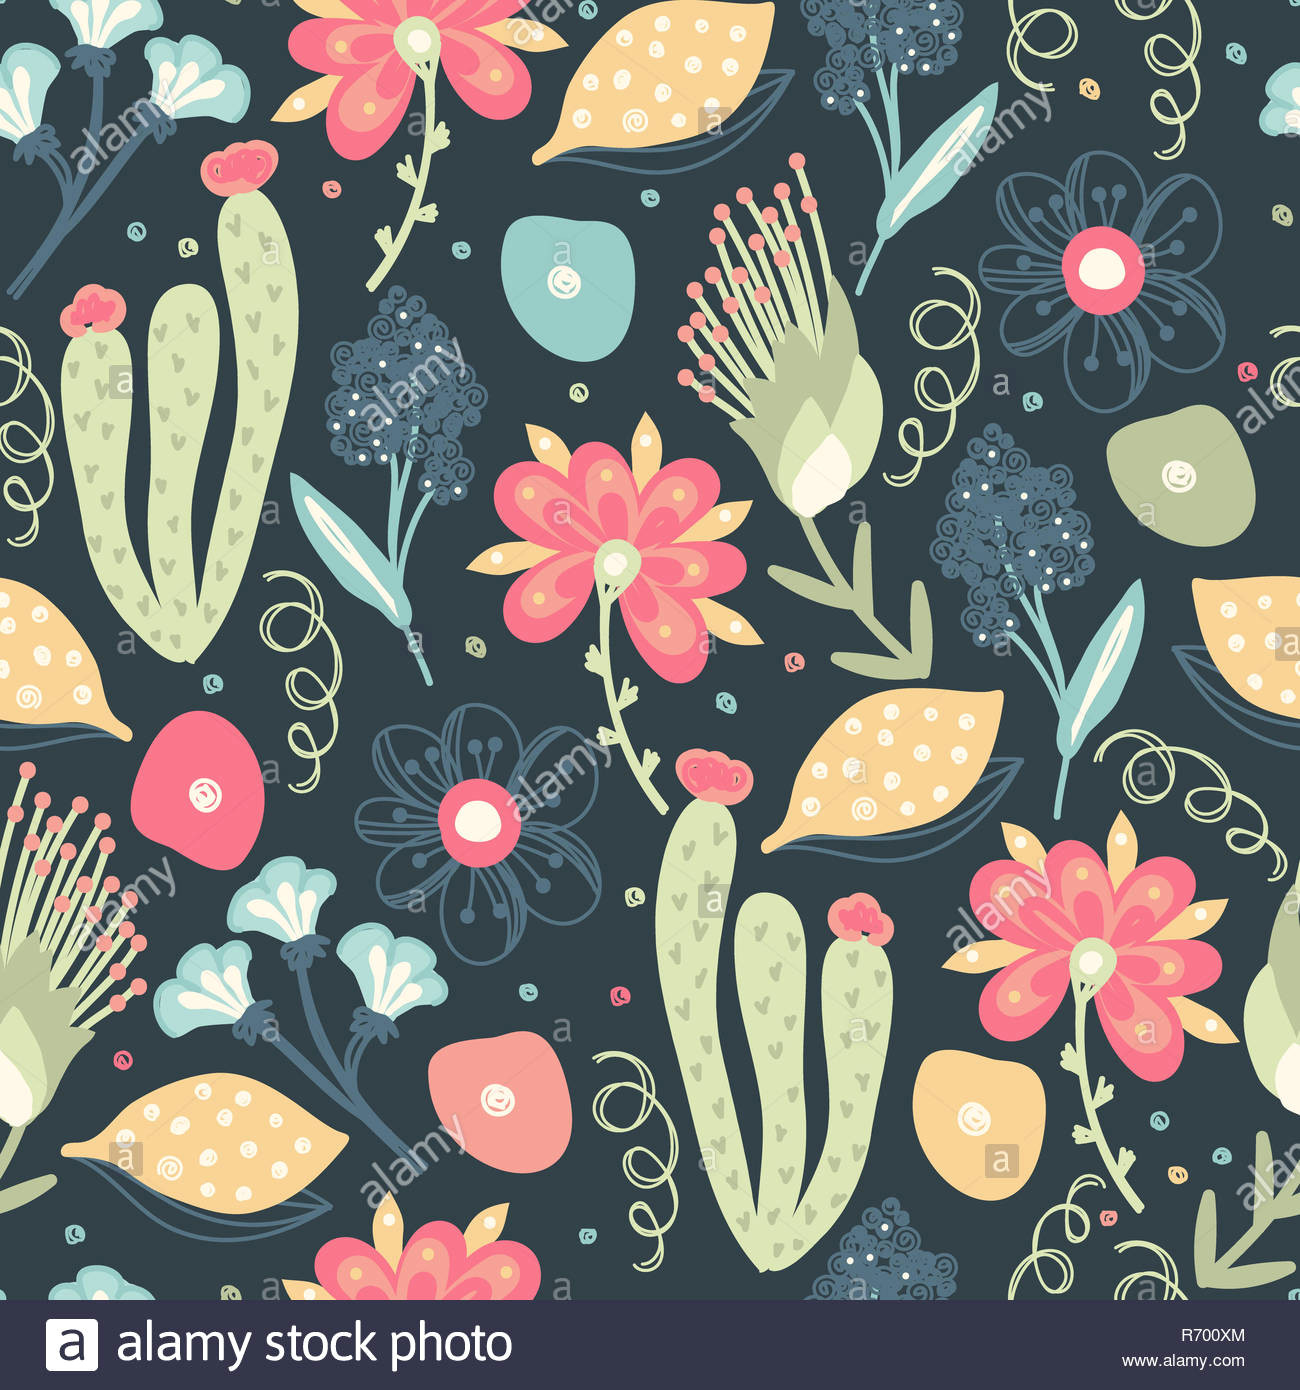 hand drawn creative flowers colorful artistic background with blossom abstract herb it can be used for wallpaper textiles wrapping card